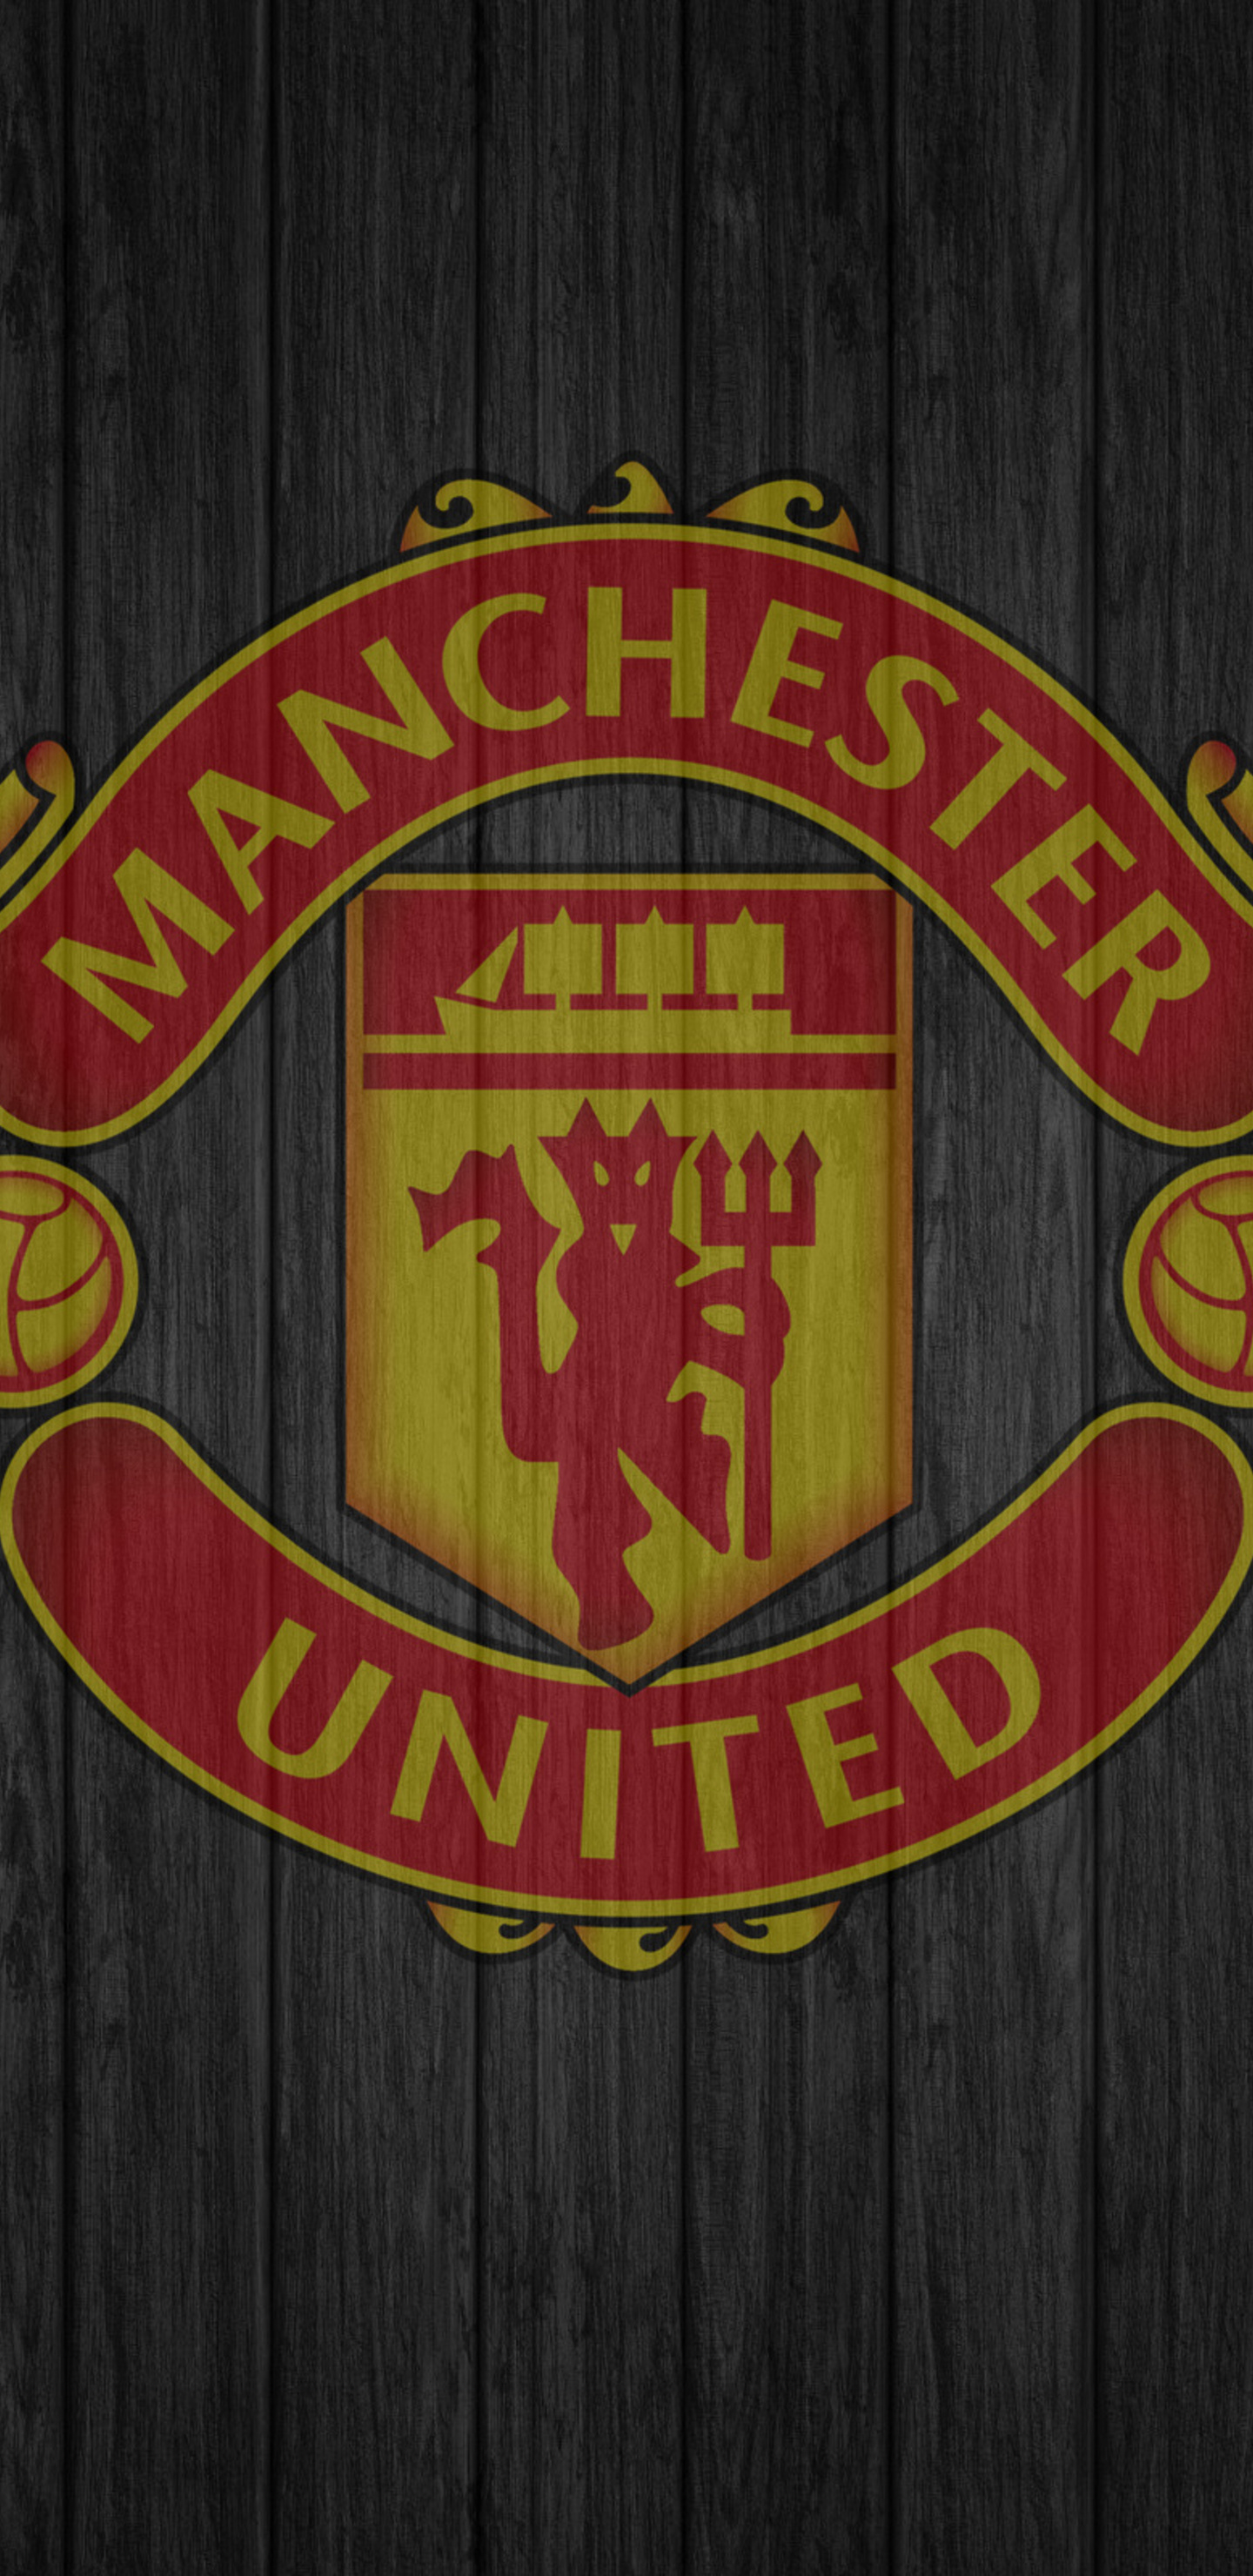 1440x2960 Manchester United Fc Logo Samsung Galaxy Note 9,8, S9,S8,S8+ QHD  HD 4k Wallpapers, Images, Backgrounds, Photos and Pictures